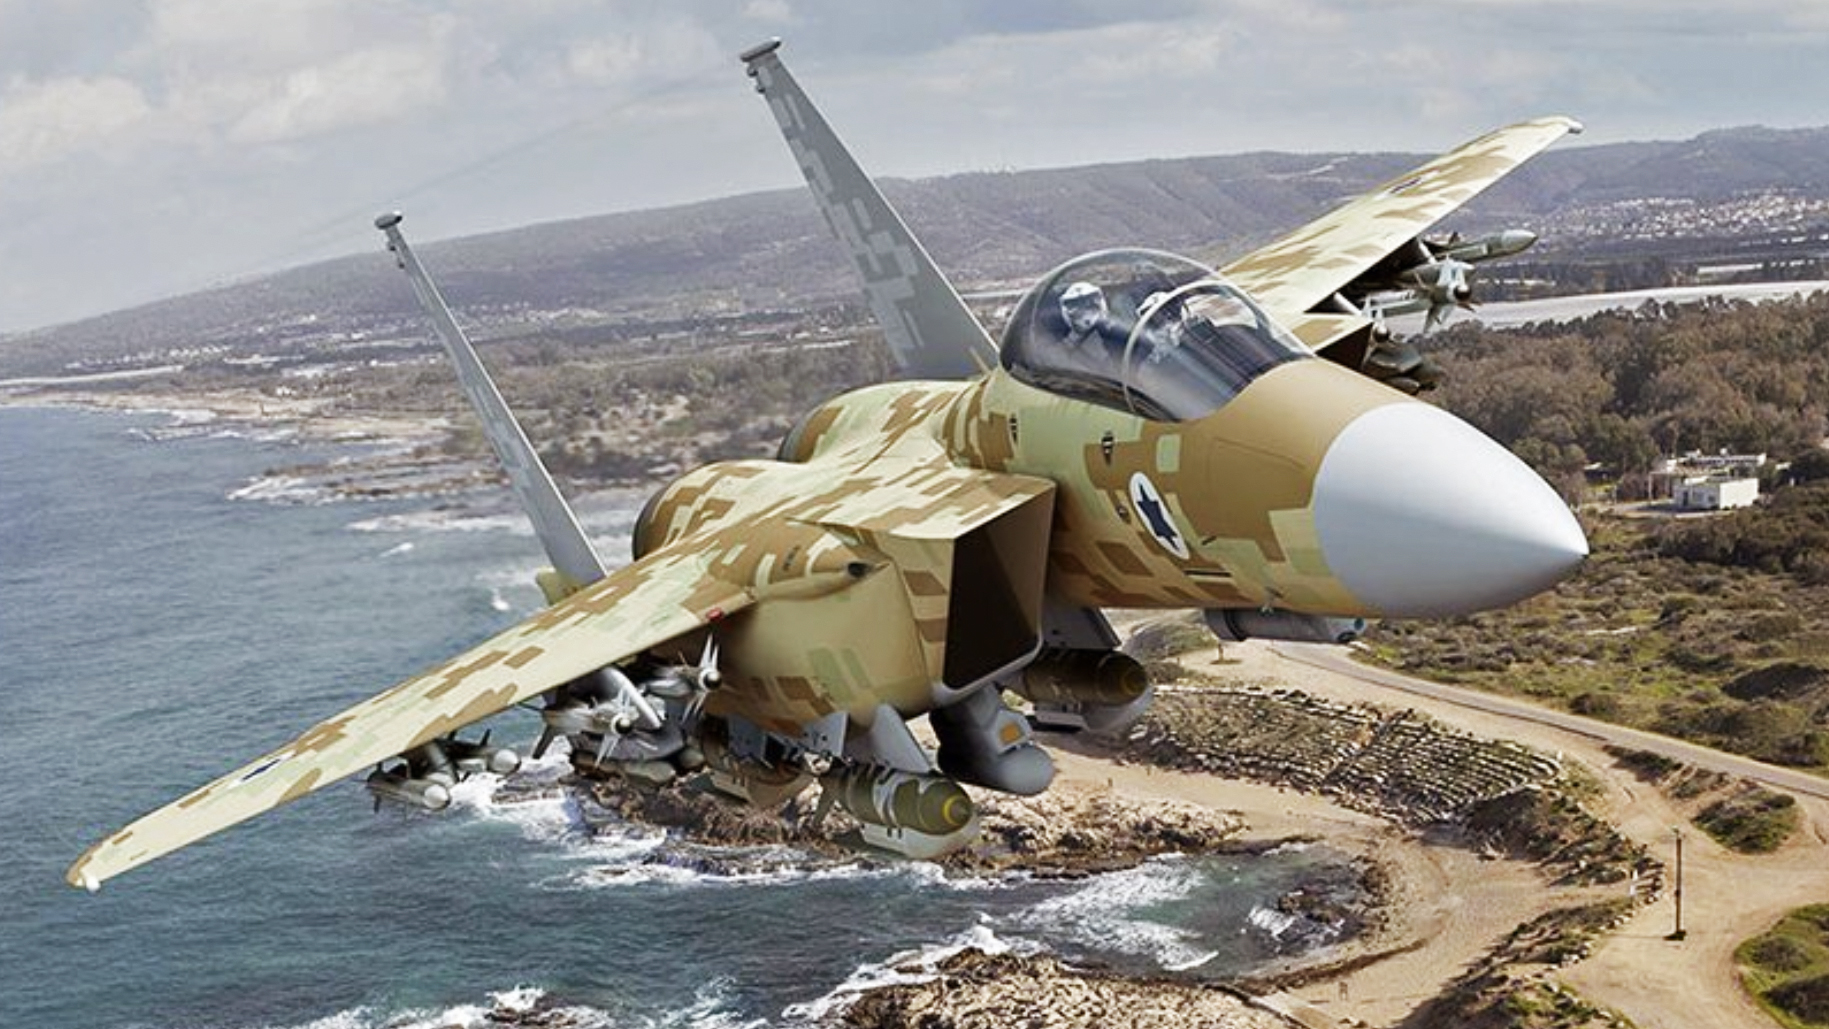 The long-running question of whether Israel will finally buy a new batch of F-15 Eagle multirole fighters looks like it might be answered sooner rather than later. The latest reports out of Washington indicate that the Biden administration is now considering whether or not to move ahead with a deal, which would likely involve as many as 50 examples of the F-15IA — an Israel-specific variant of the F-15EX.